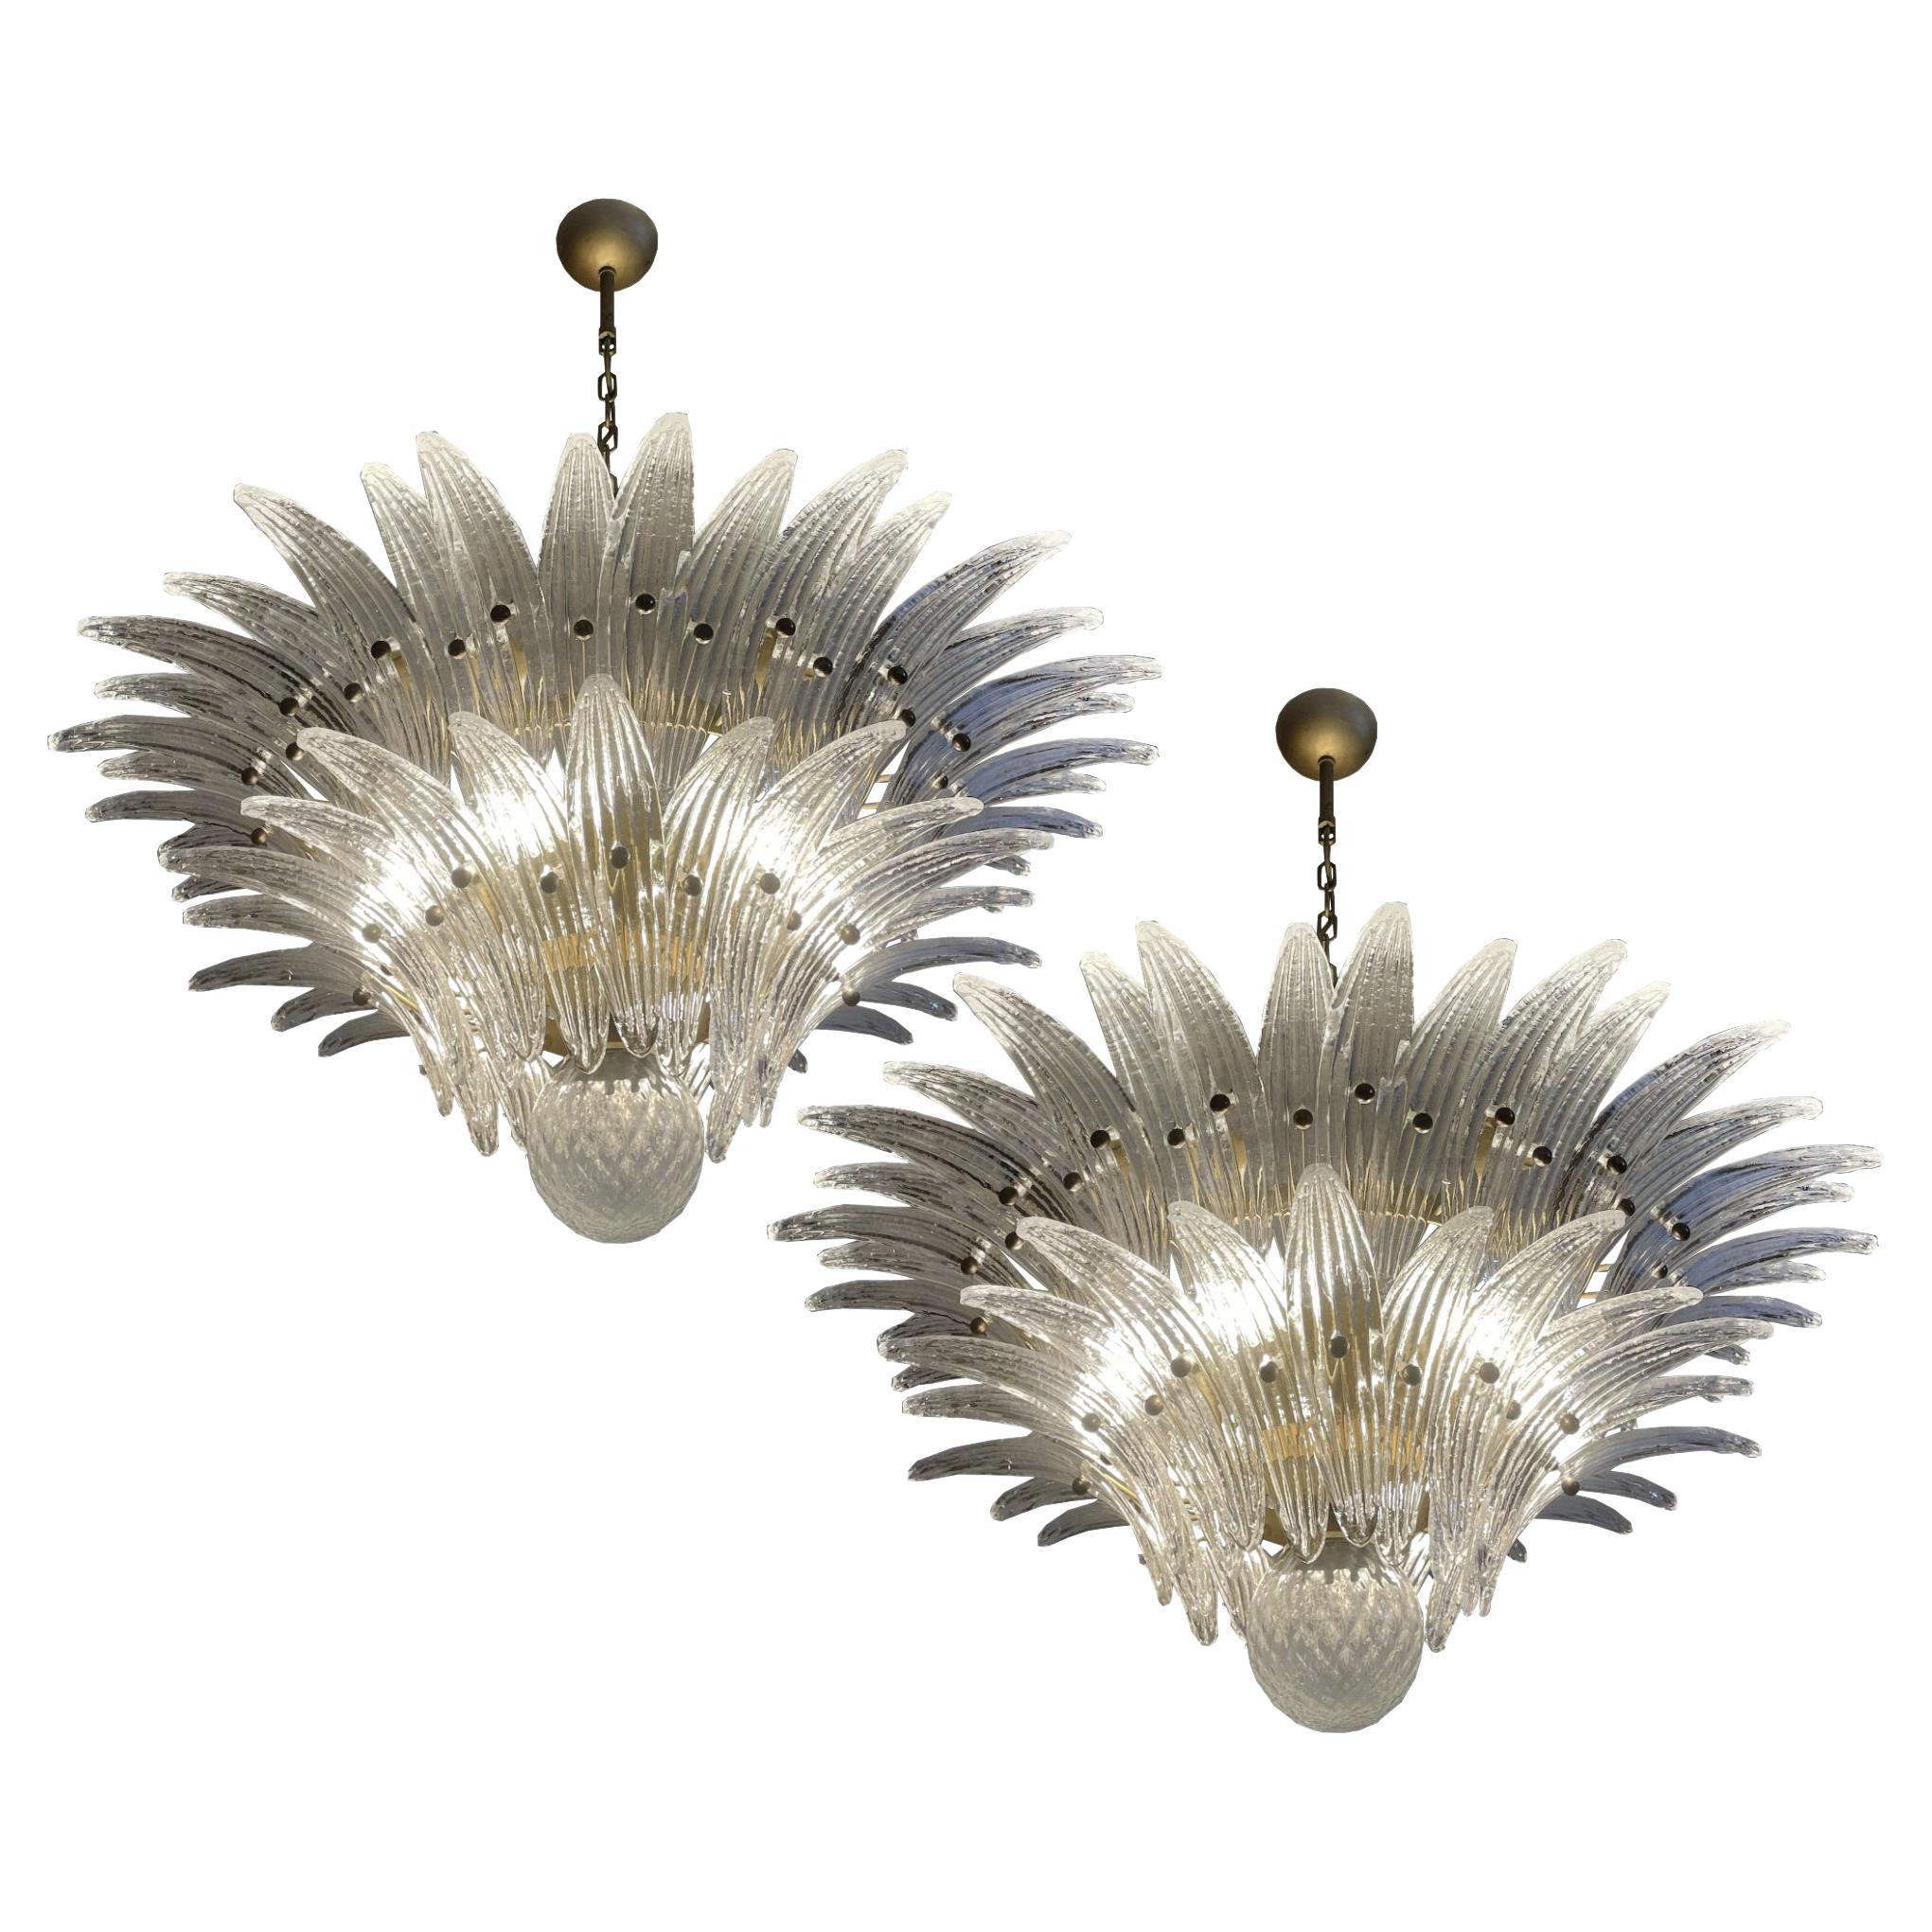 Mid-20th Century Spectacular Pair of Venetian Chandeliers, Murano, 1980s For Sale